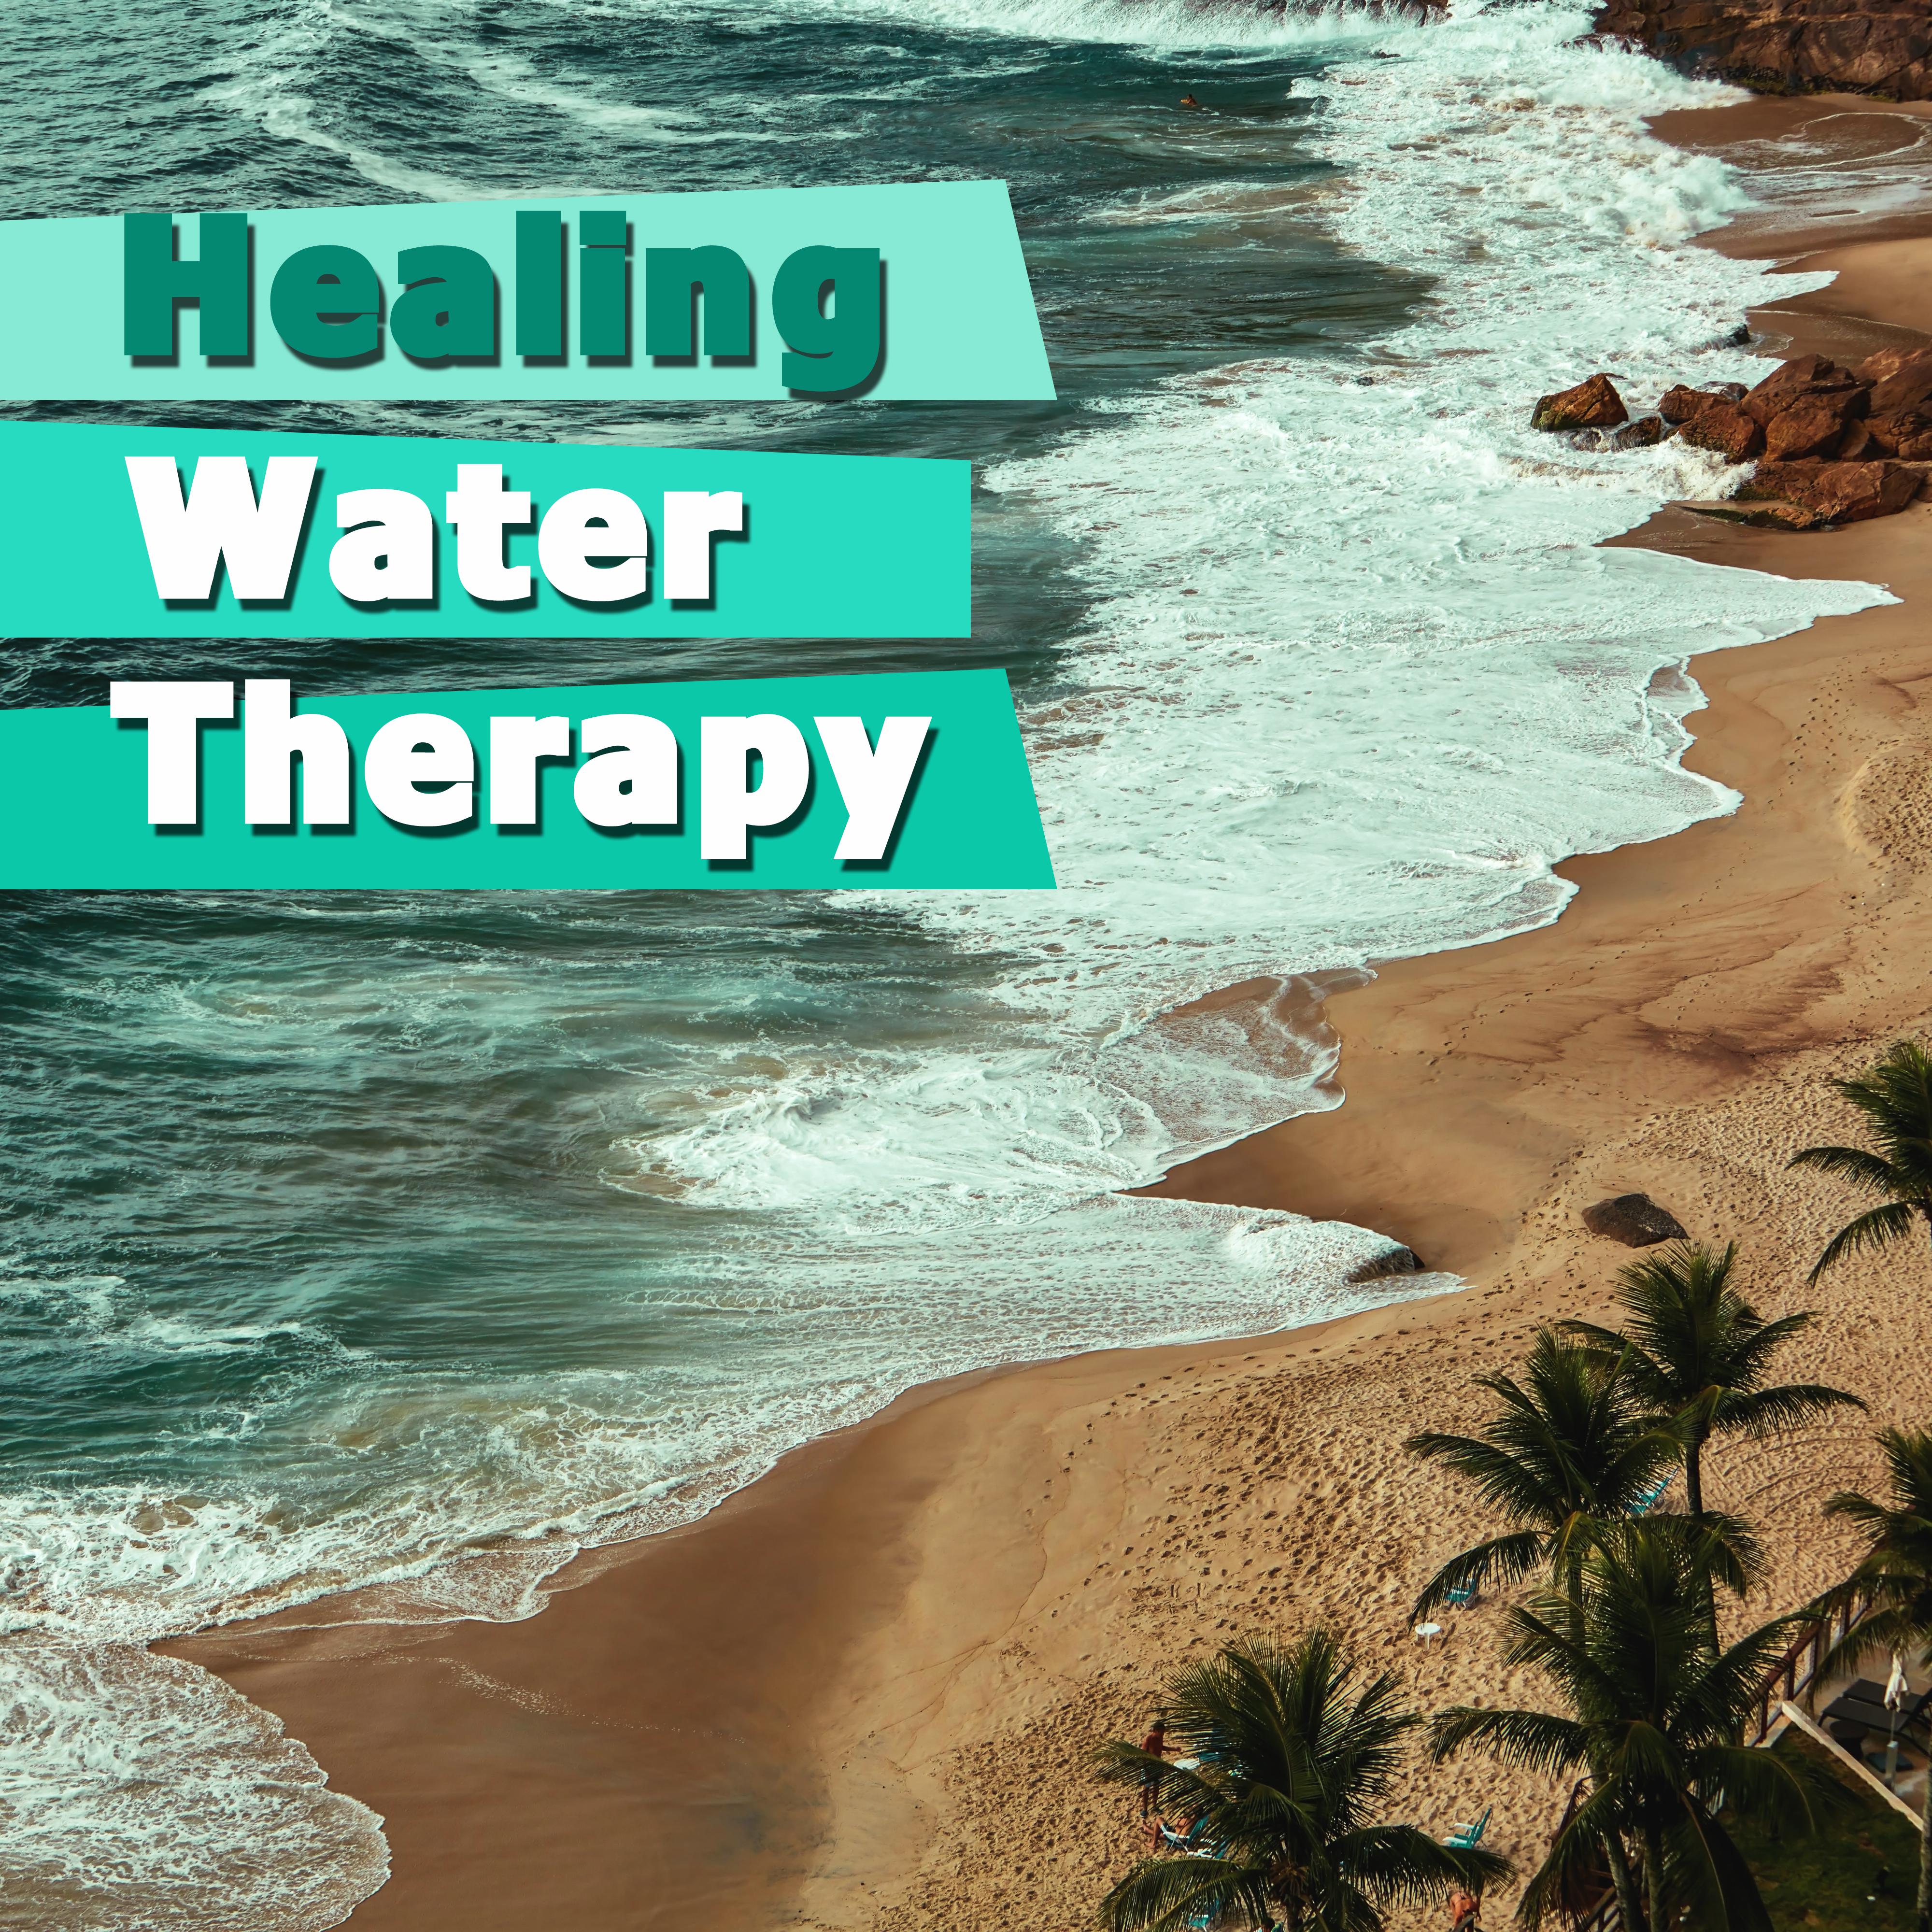 Healing Water Therapy – Sounds to Rest & Calm Down, Water Waves, Relax Mind & Body